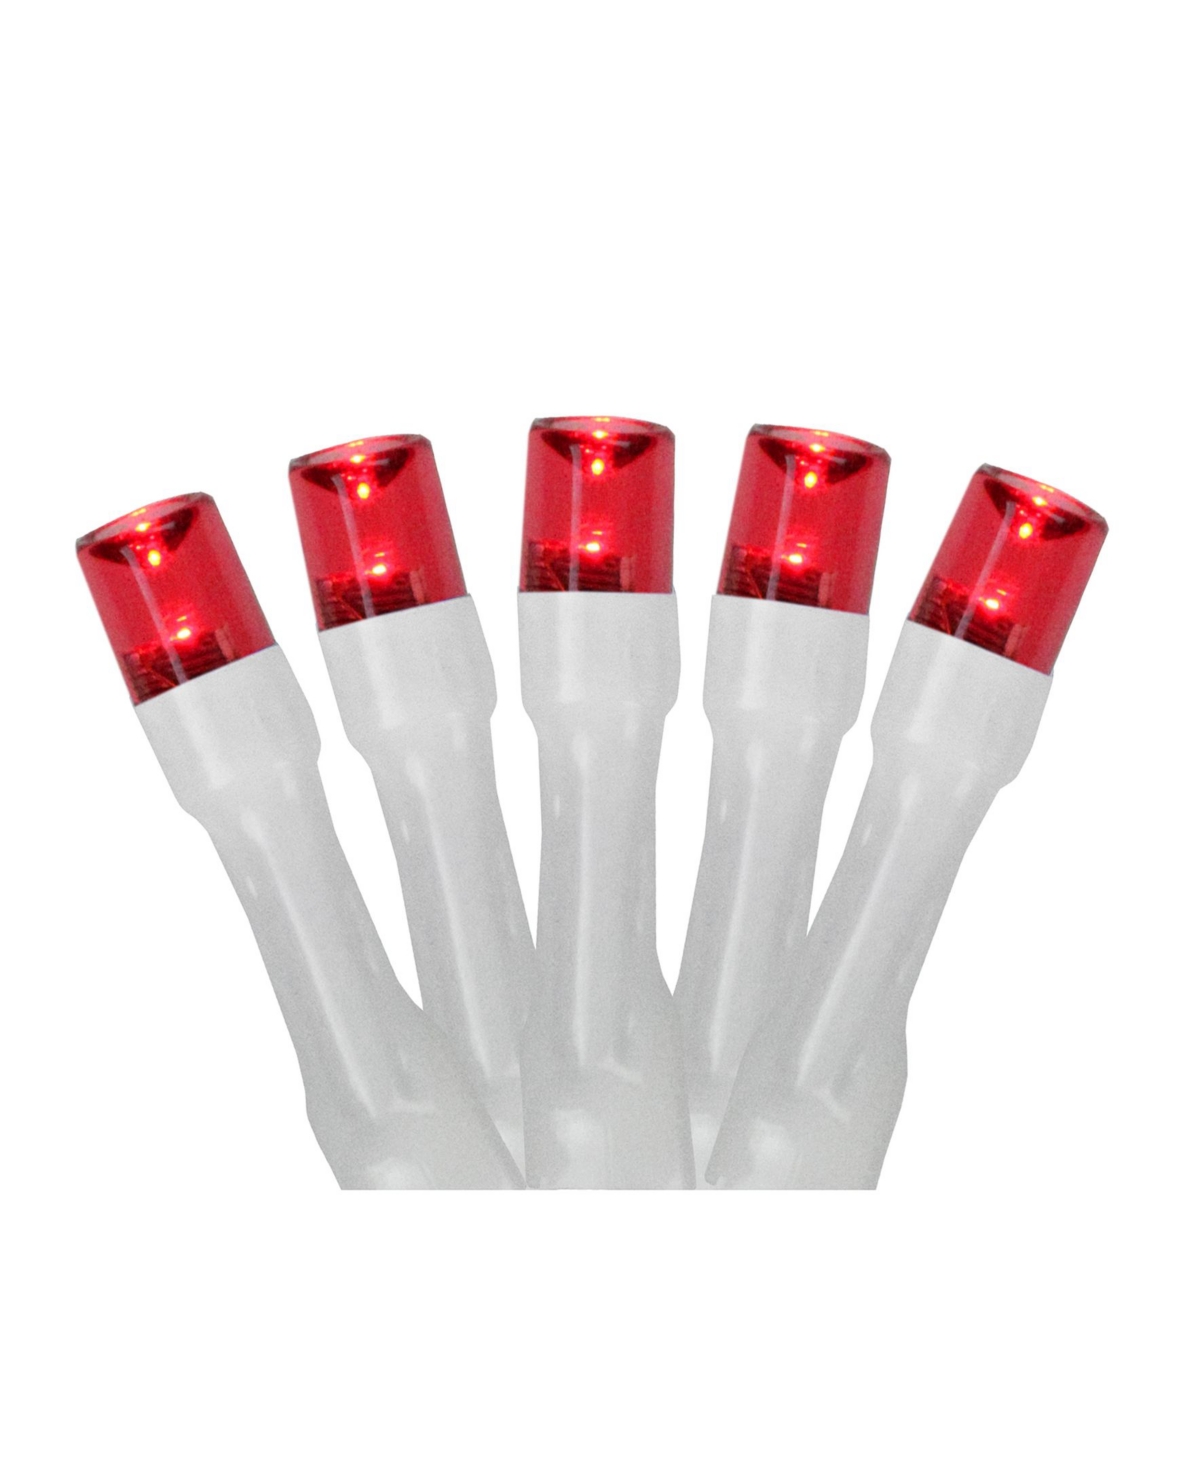 Northlight Set Of 20 Battery Operated Red Led Wide Angle Christmas Lights - White Wire